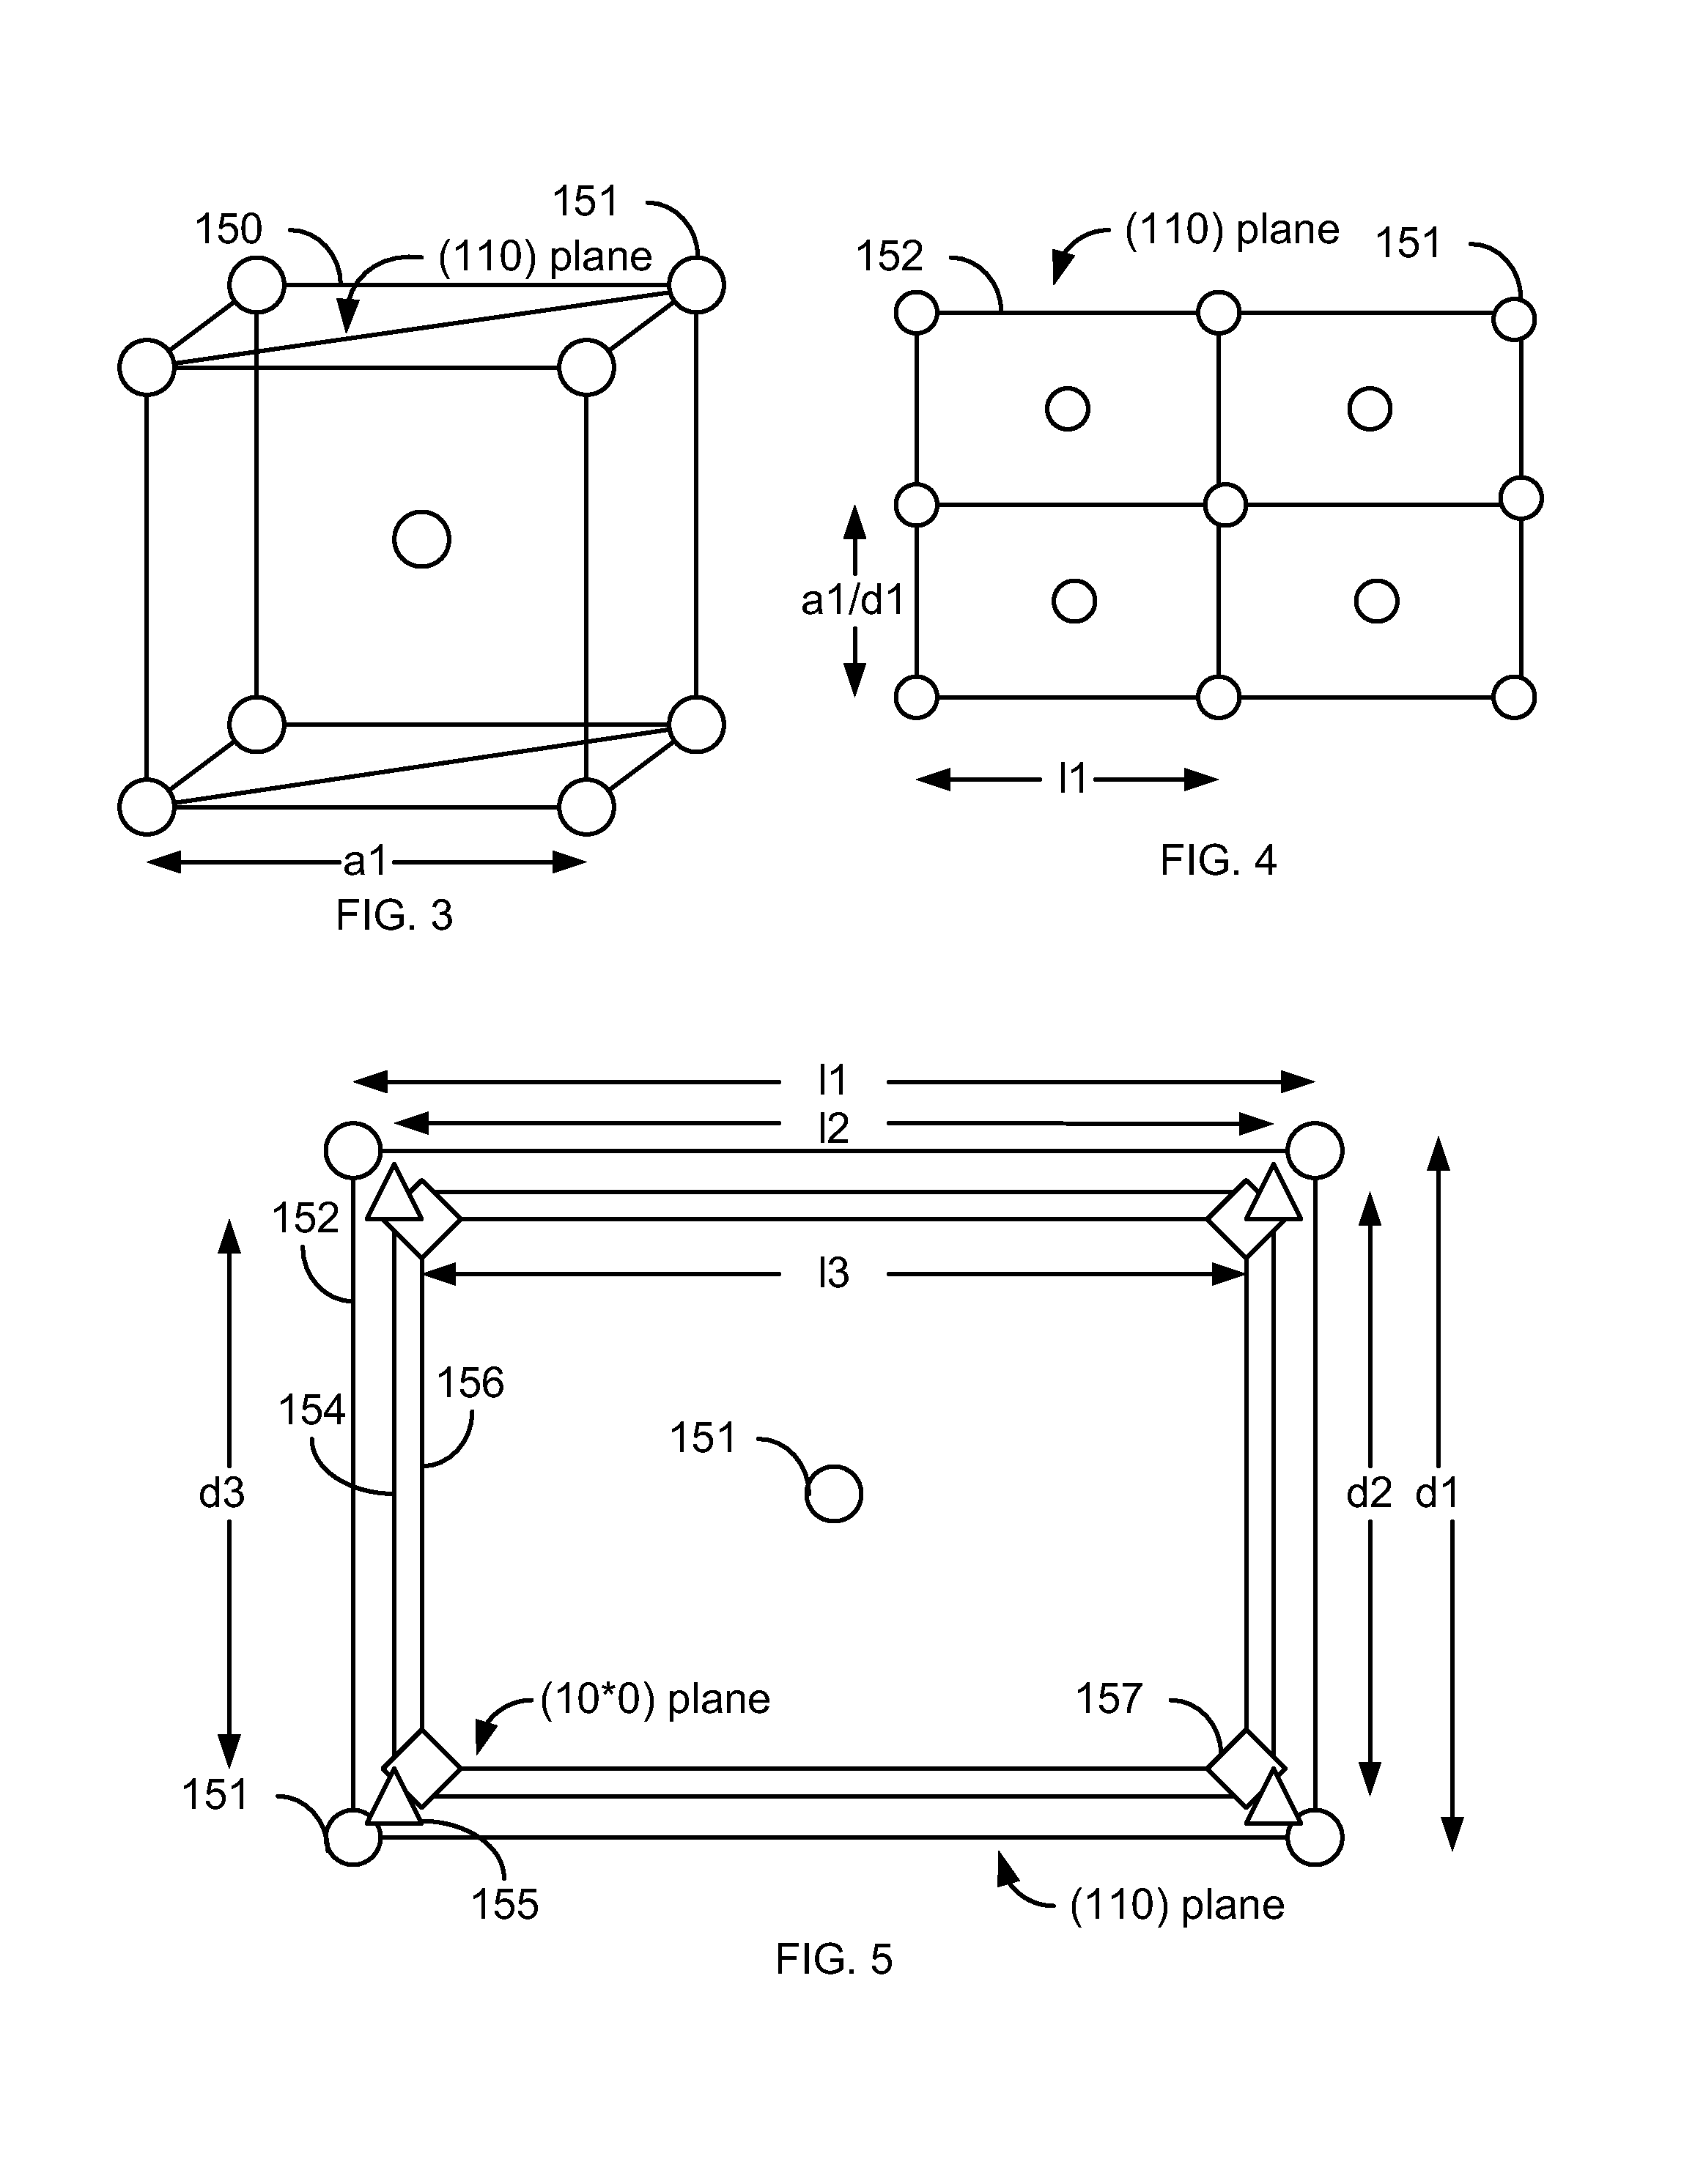 Method and system for providing a hard bias structure in a magnetic recording transducer